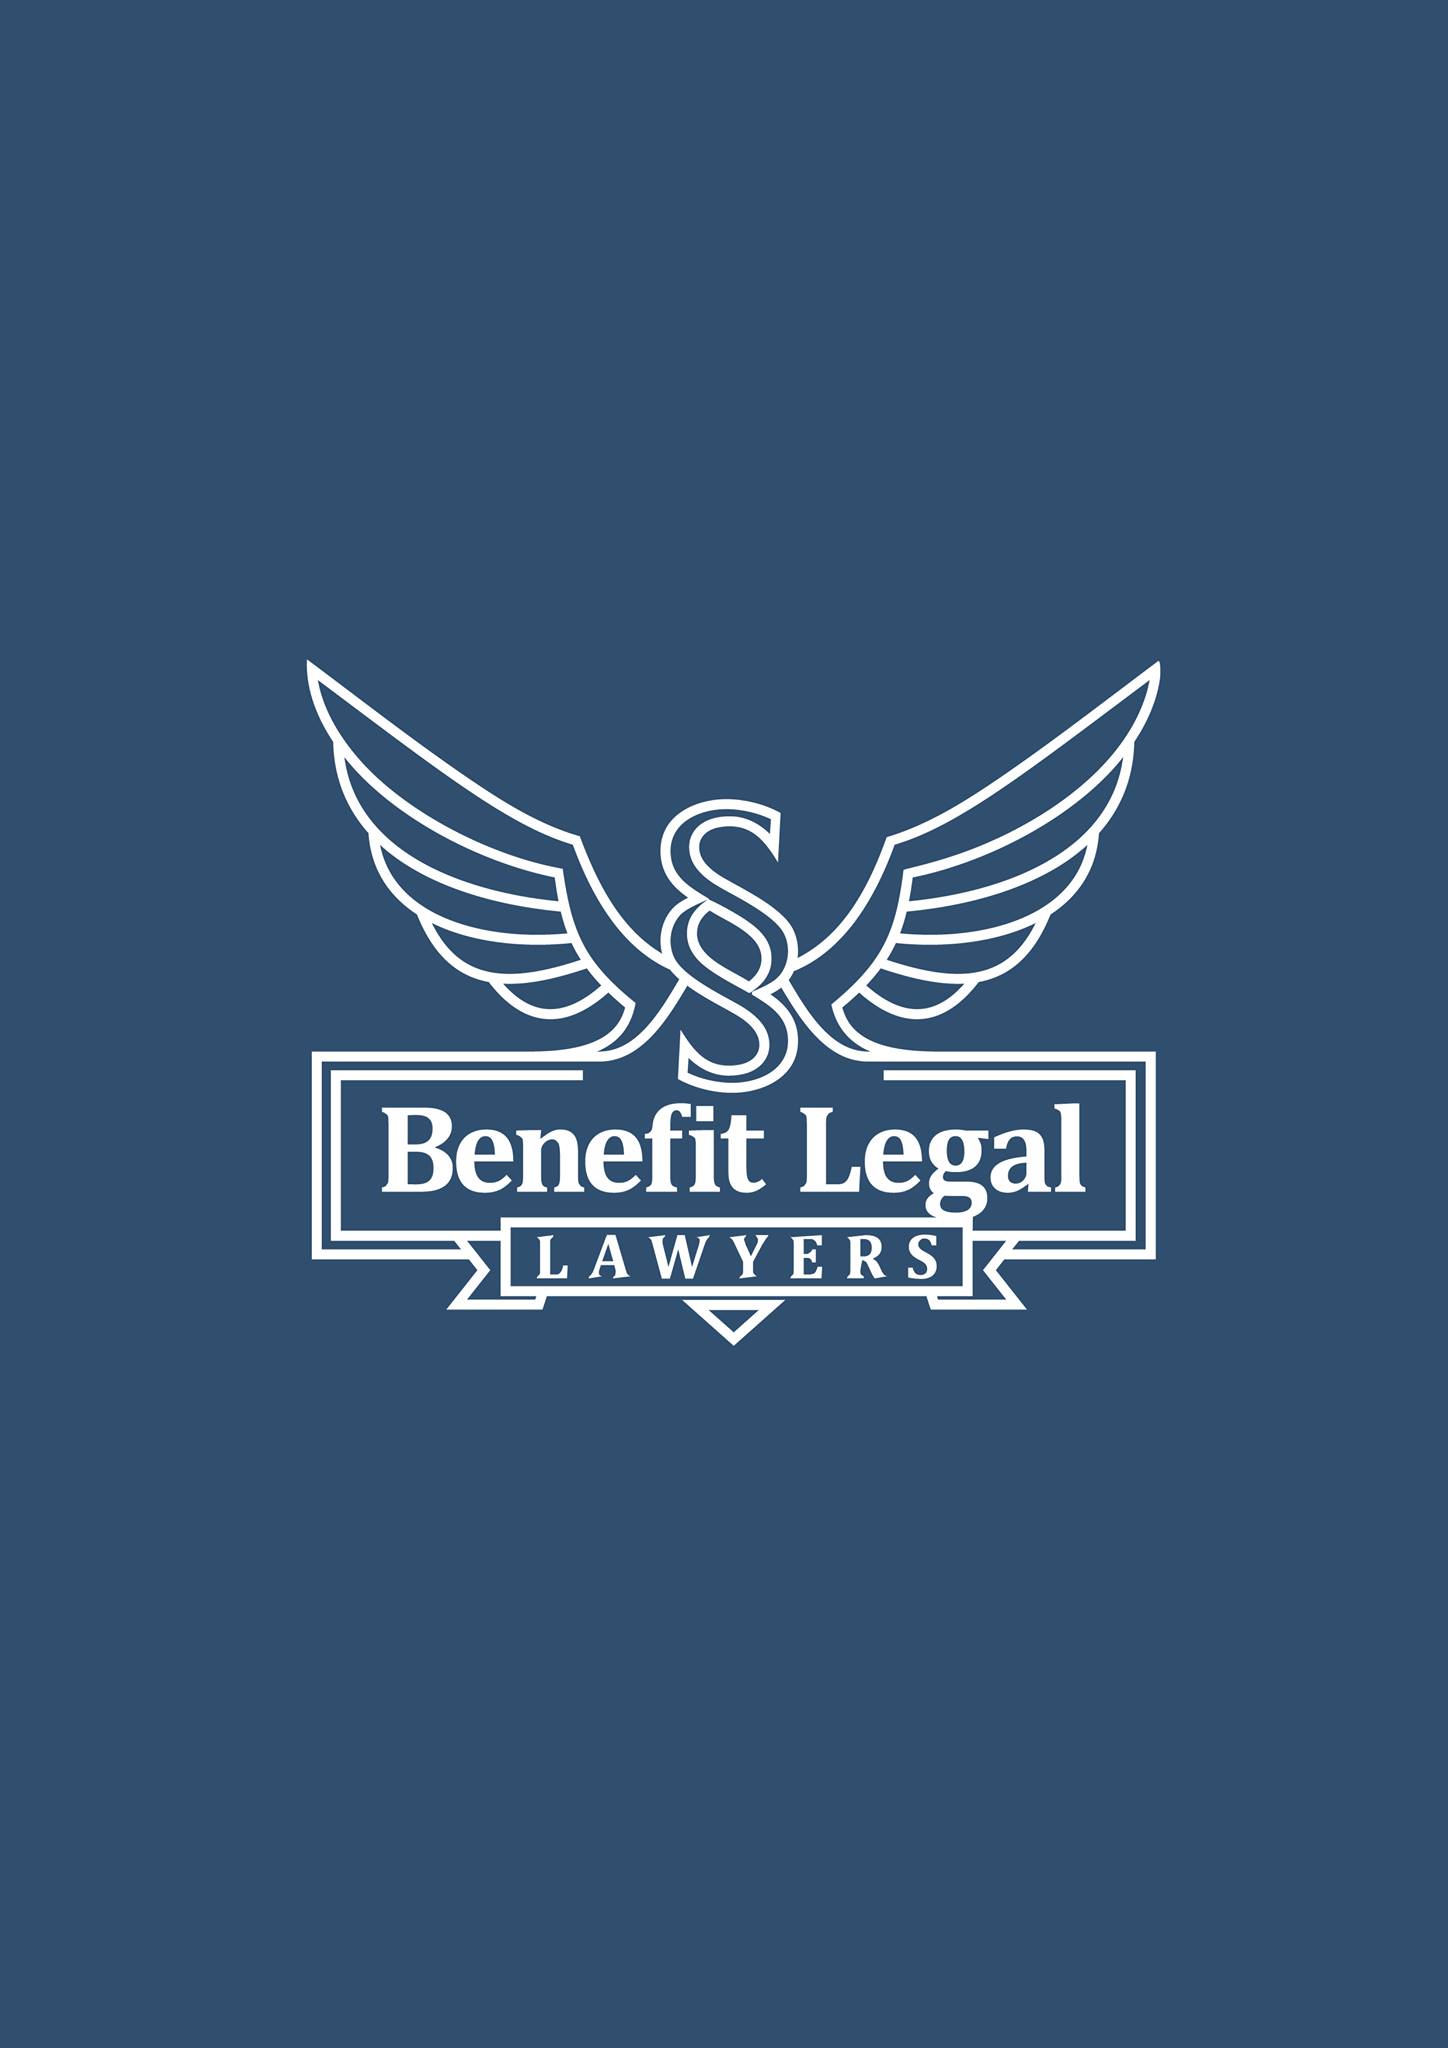 Company logo of Benefit Legal Lawyers